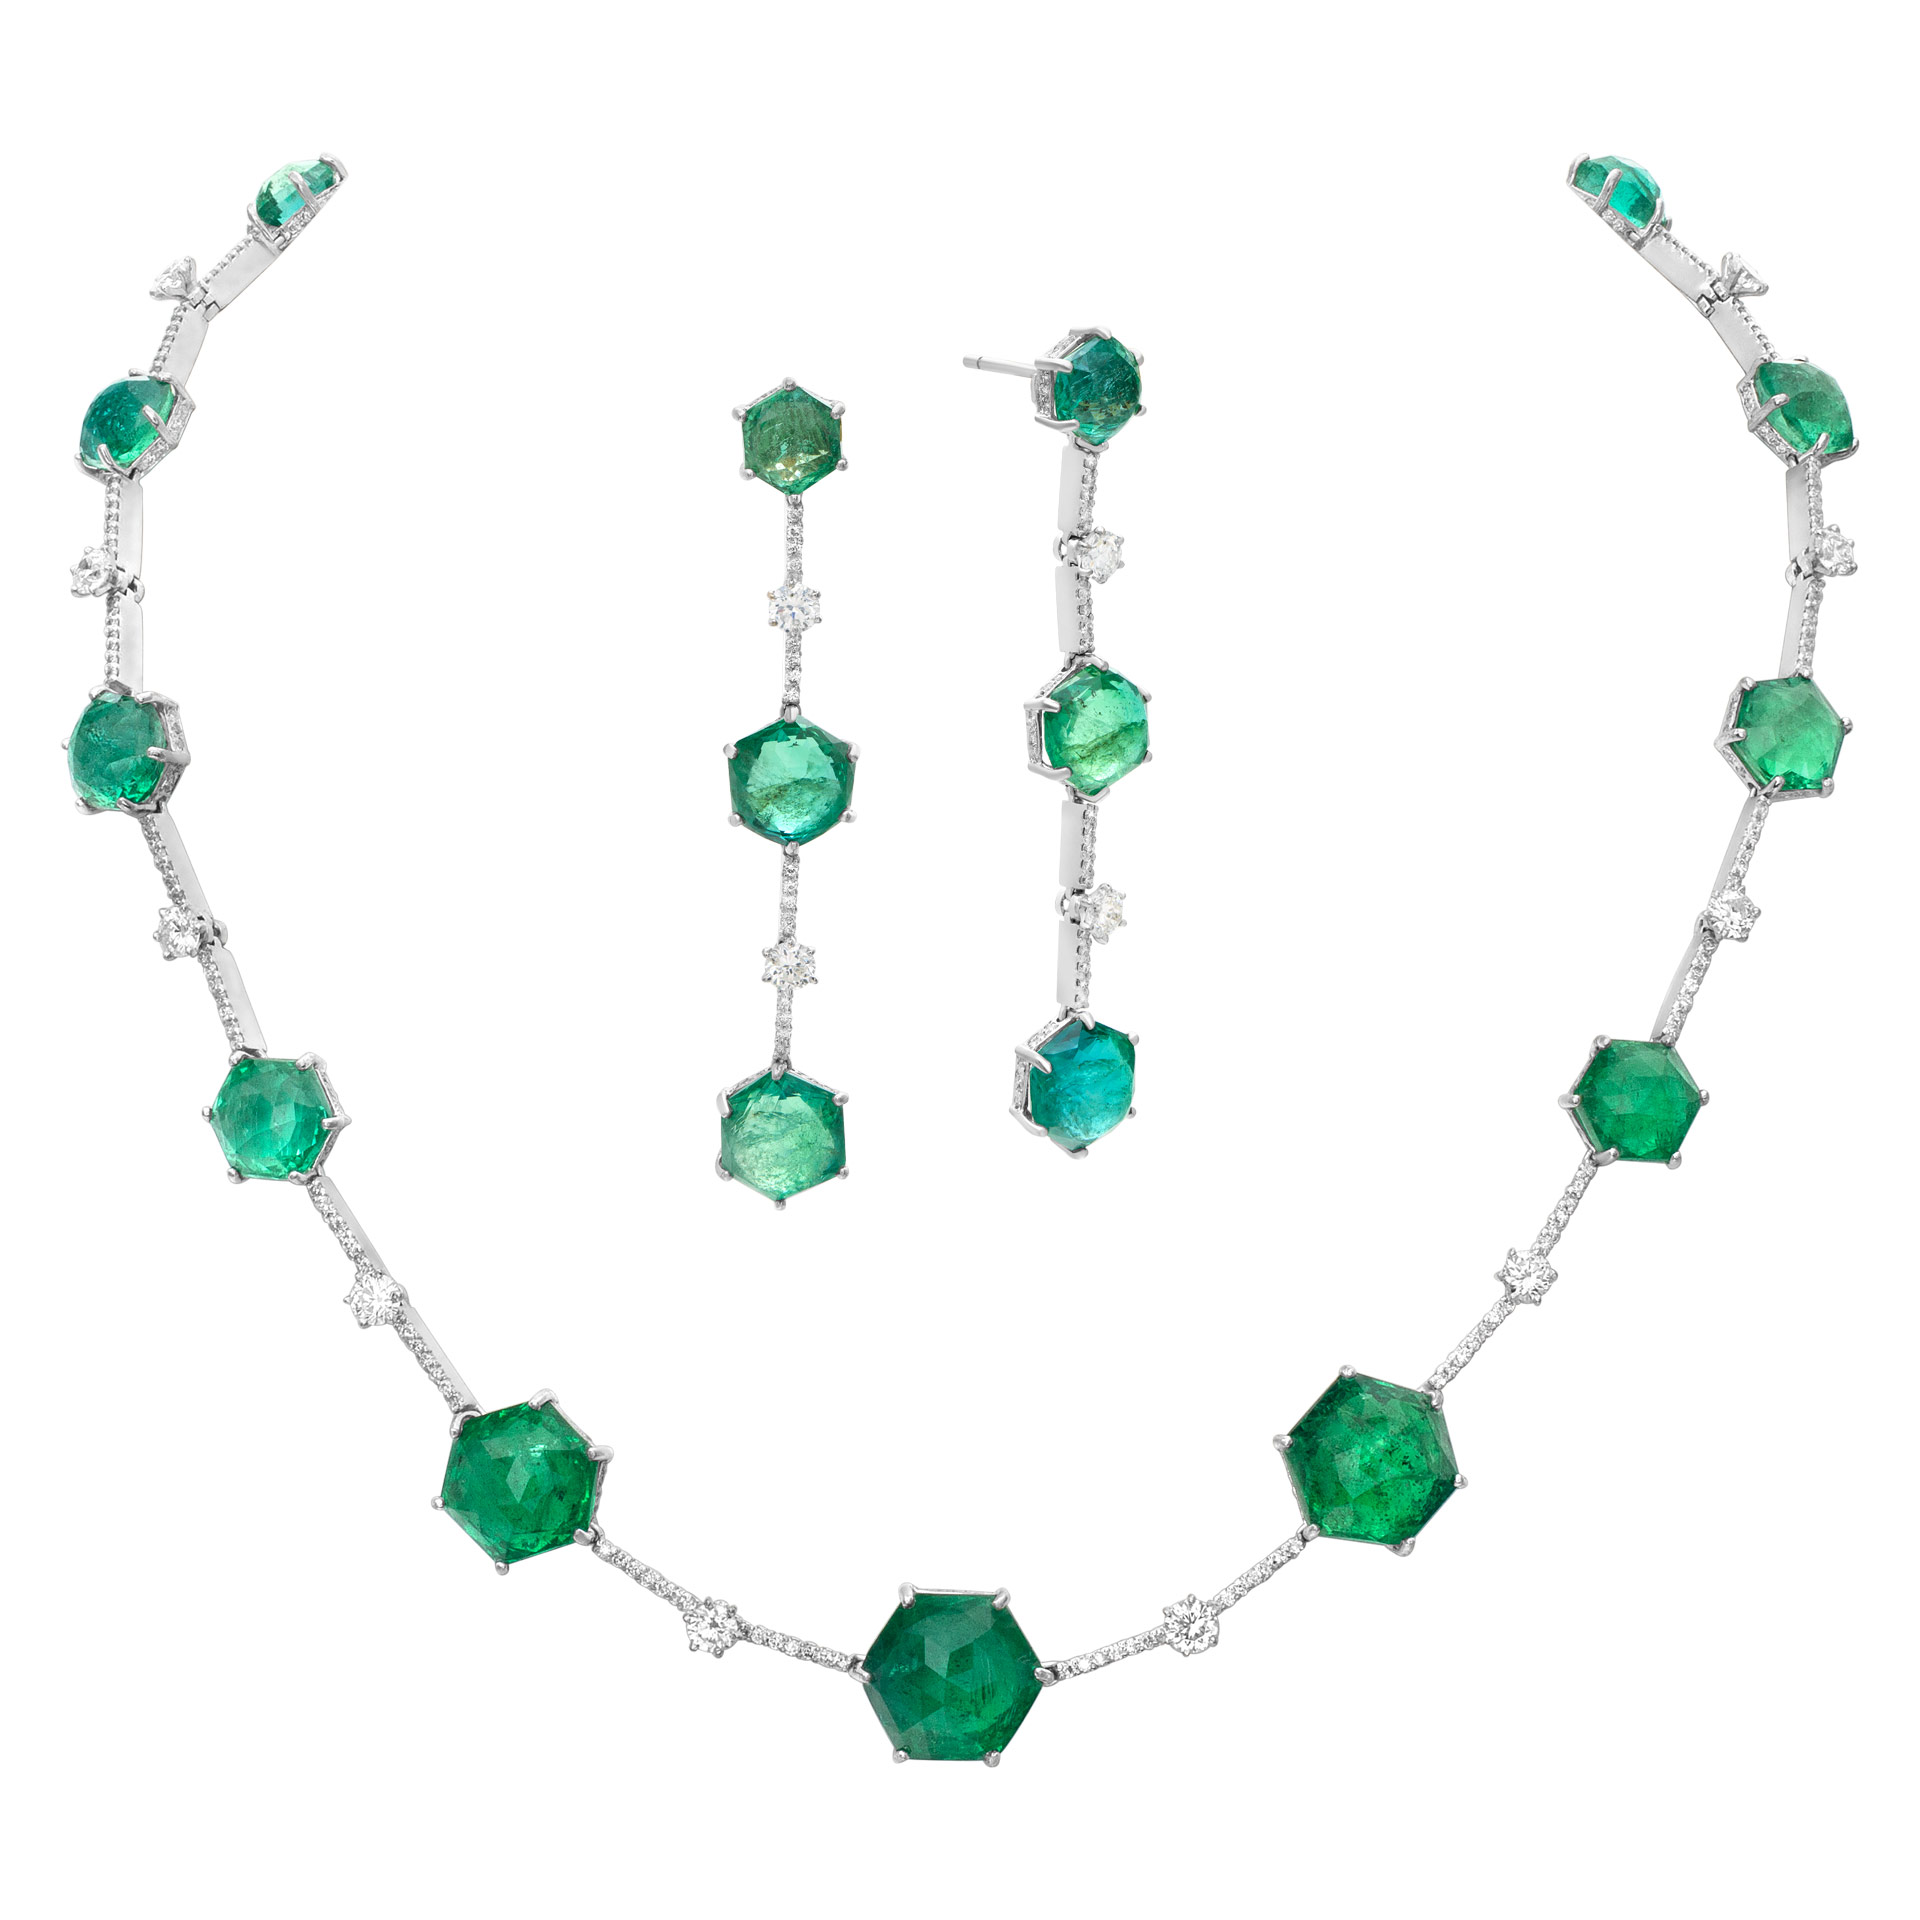 Beautiful 18k white gold diamond and emerald earring and necklace set